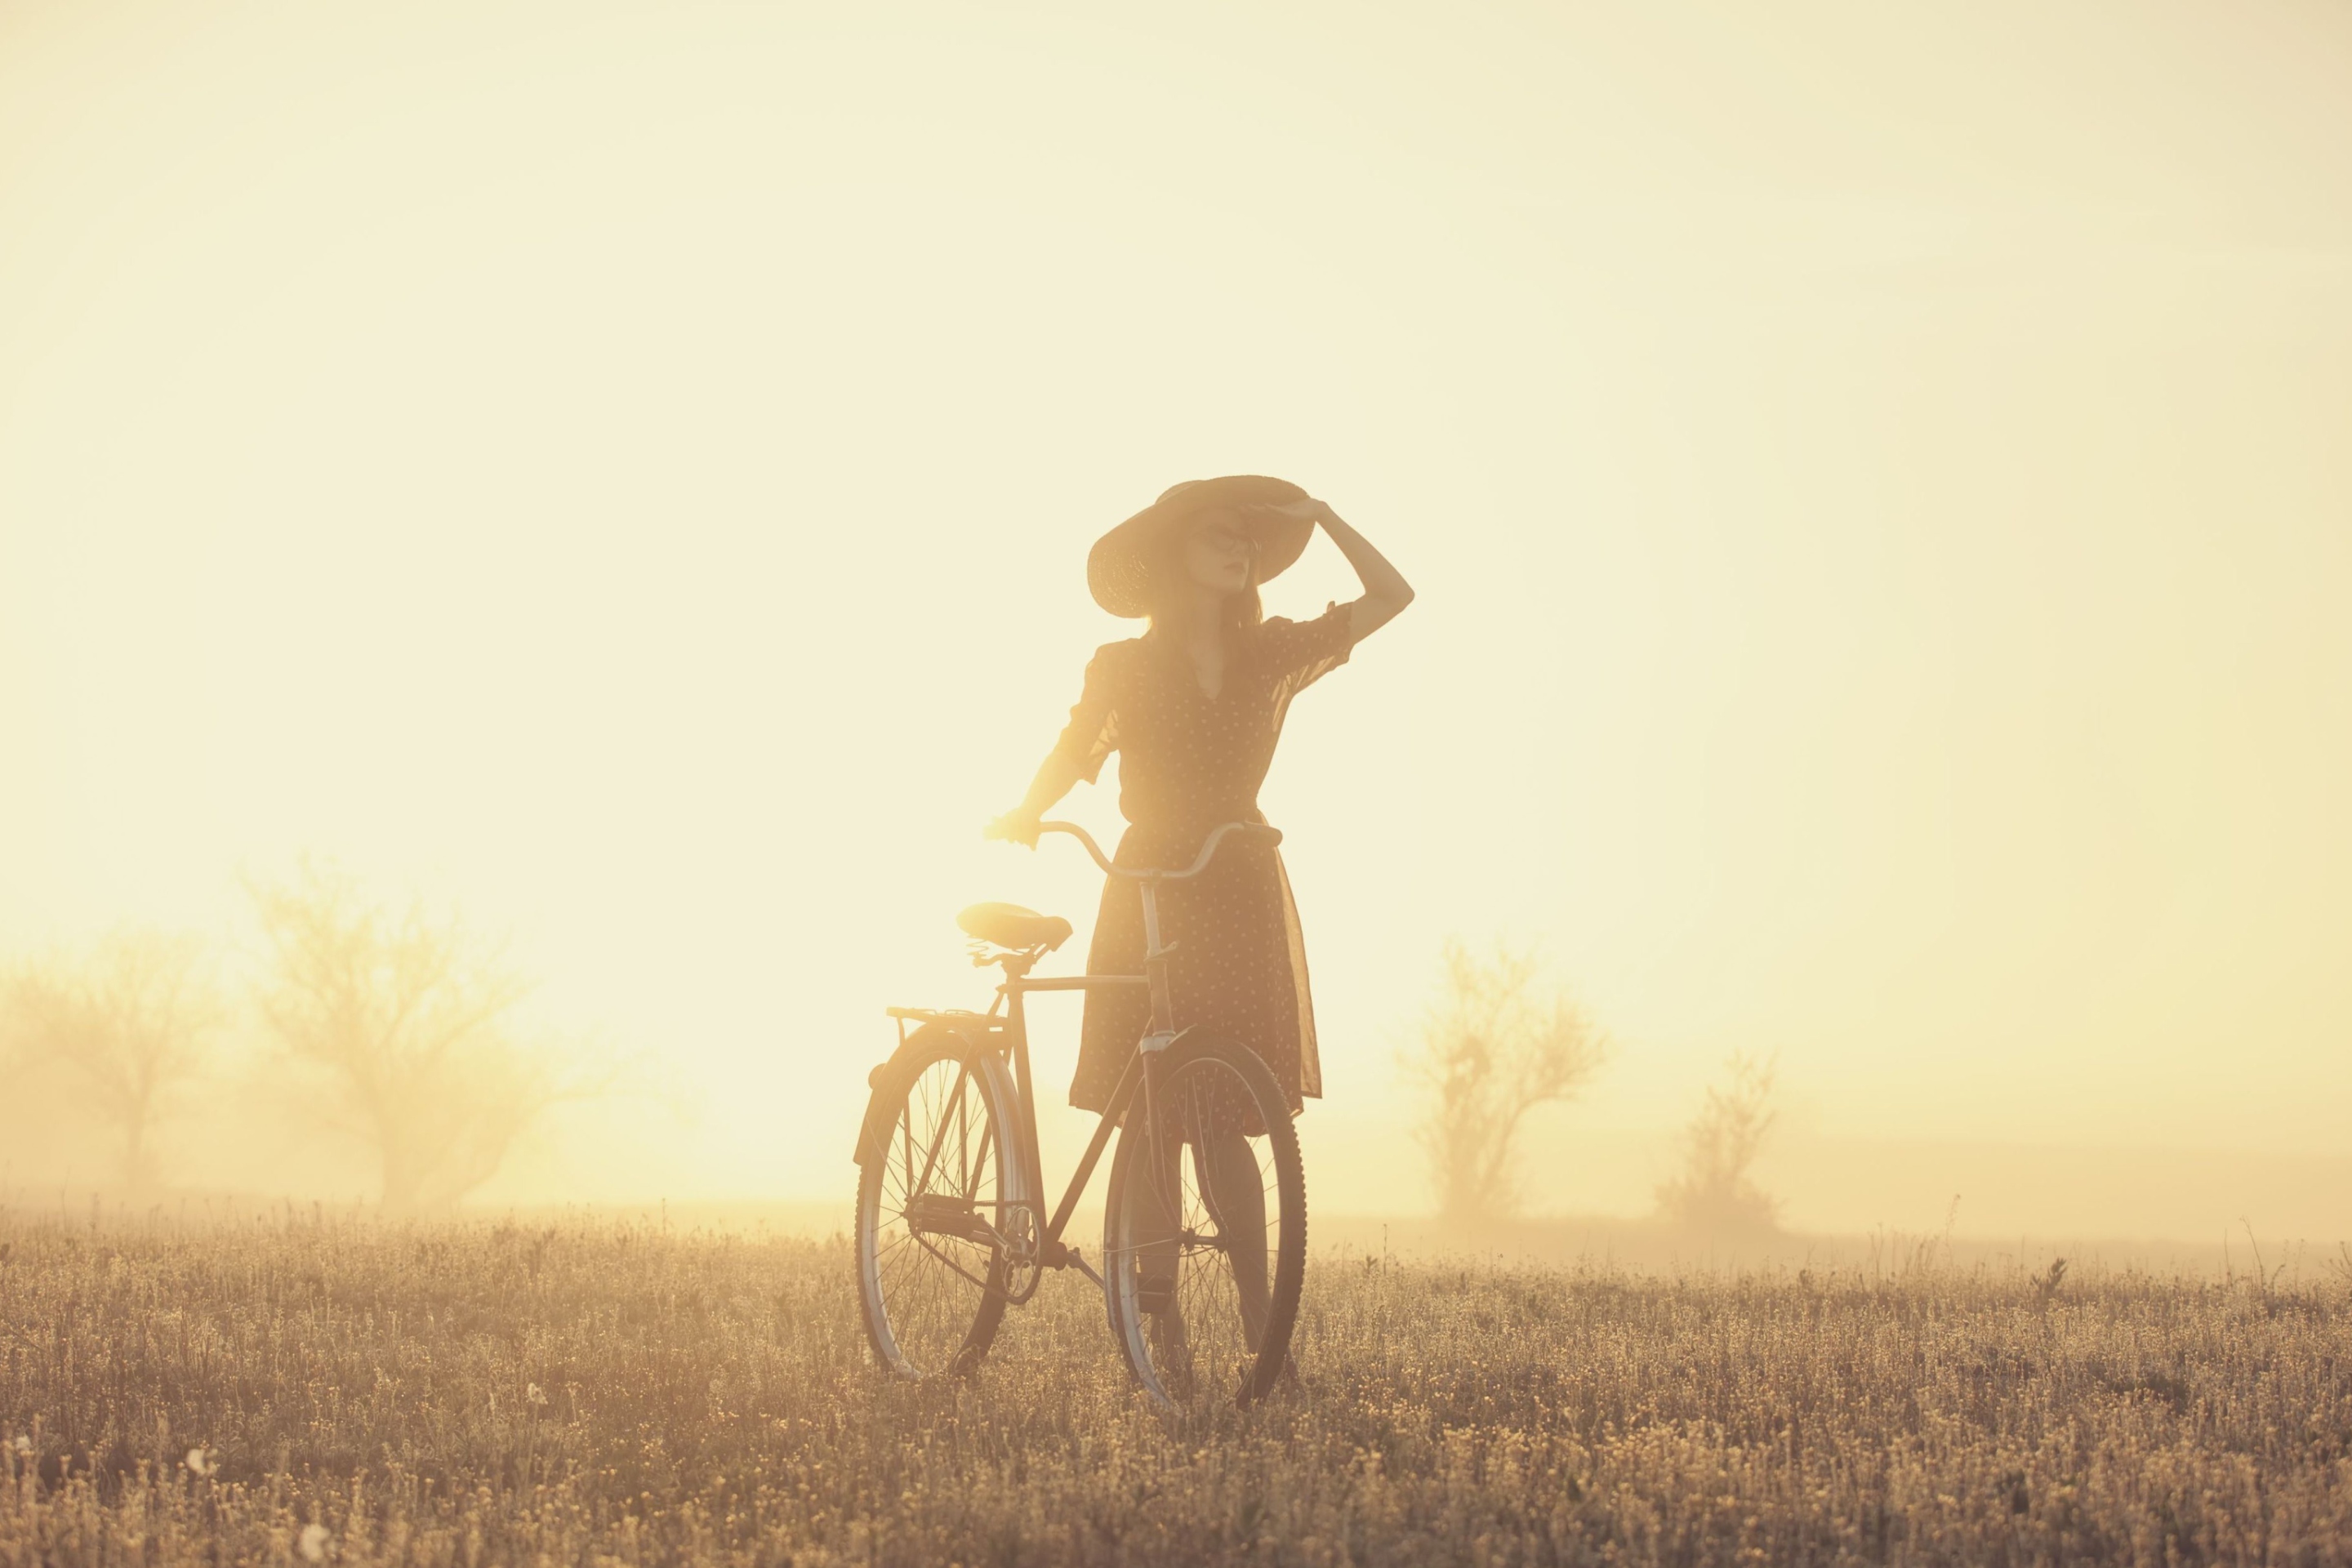 Girl And Bicycle On Misty Day wallpaper 2880x1920